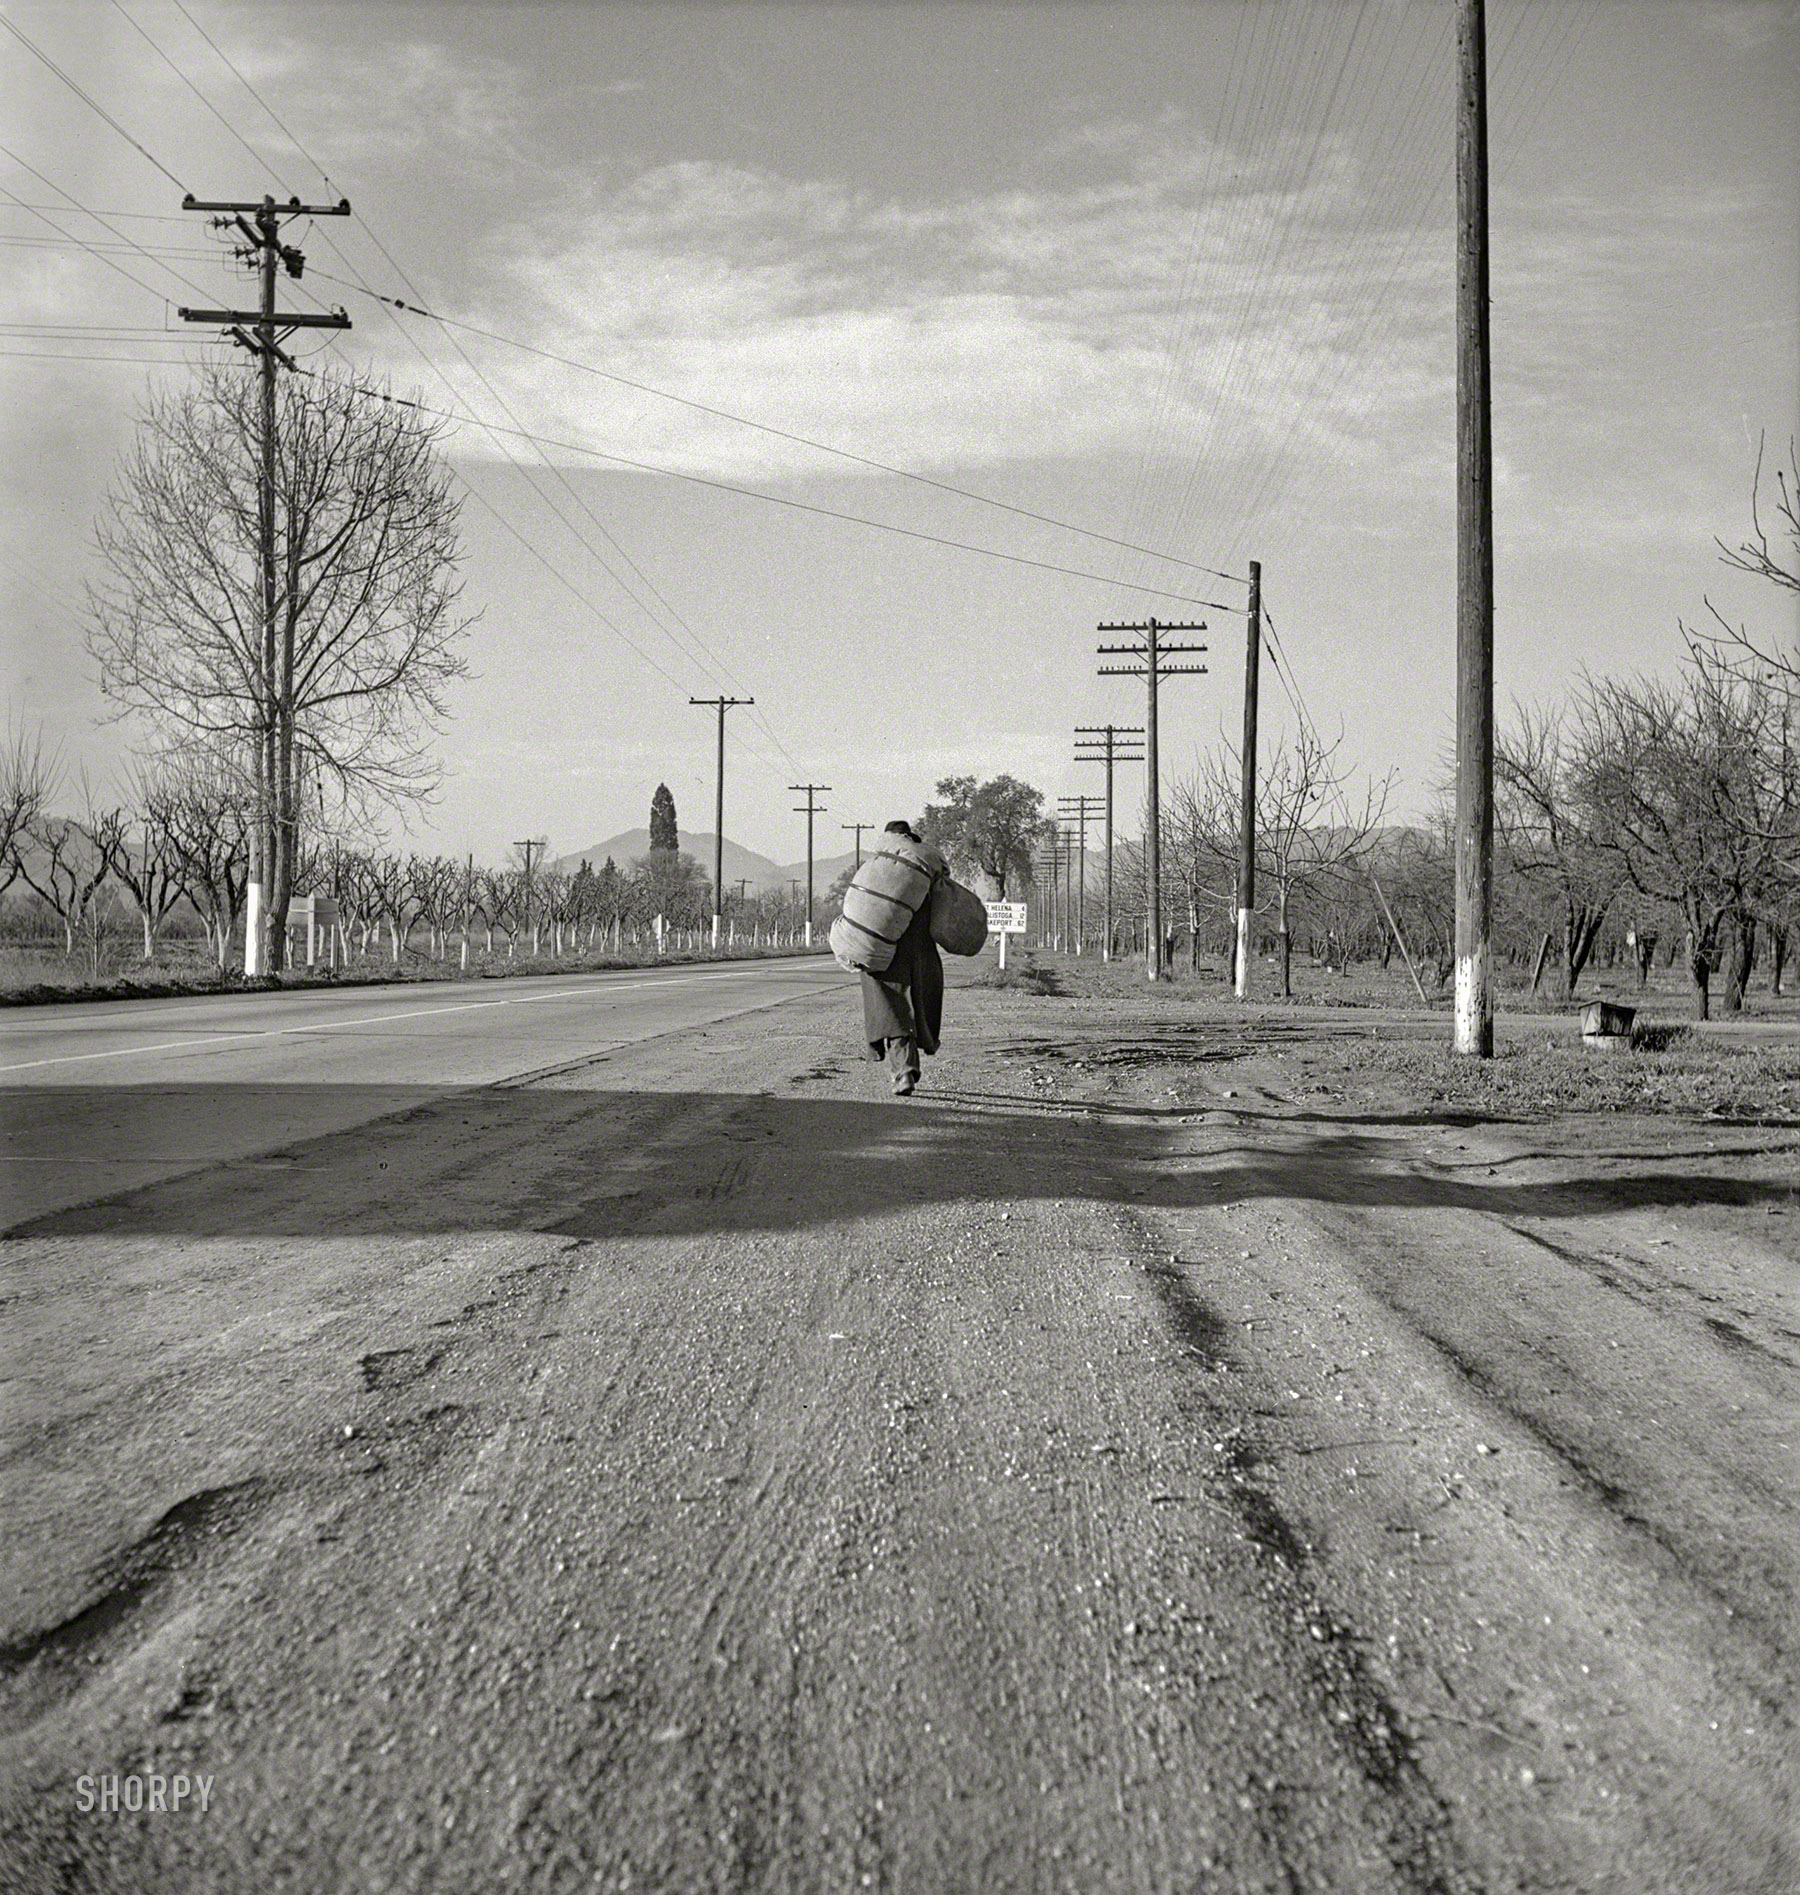 December 1938. "Napa Valley. More than 25 years a bindlestiff. [Also seen here.] Walks from the mines to the lumber camps to the farms. The type that formed the backbone of the Industrial Workers of the World in California before the war. Subject of Carleton Parker's studies on Industrial Workers of the World." Photo by Dorothea Lange for the Farm Security Administration. View full size.